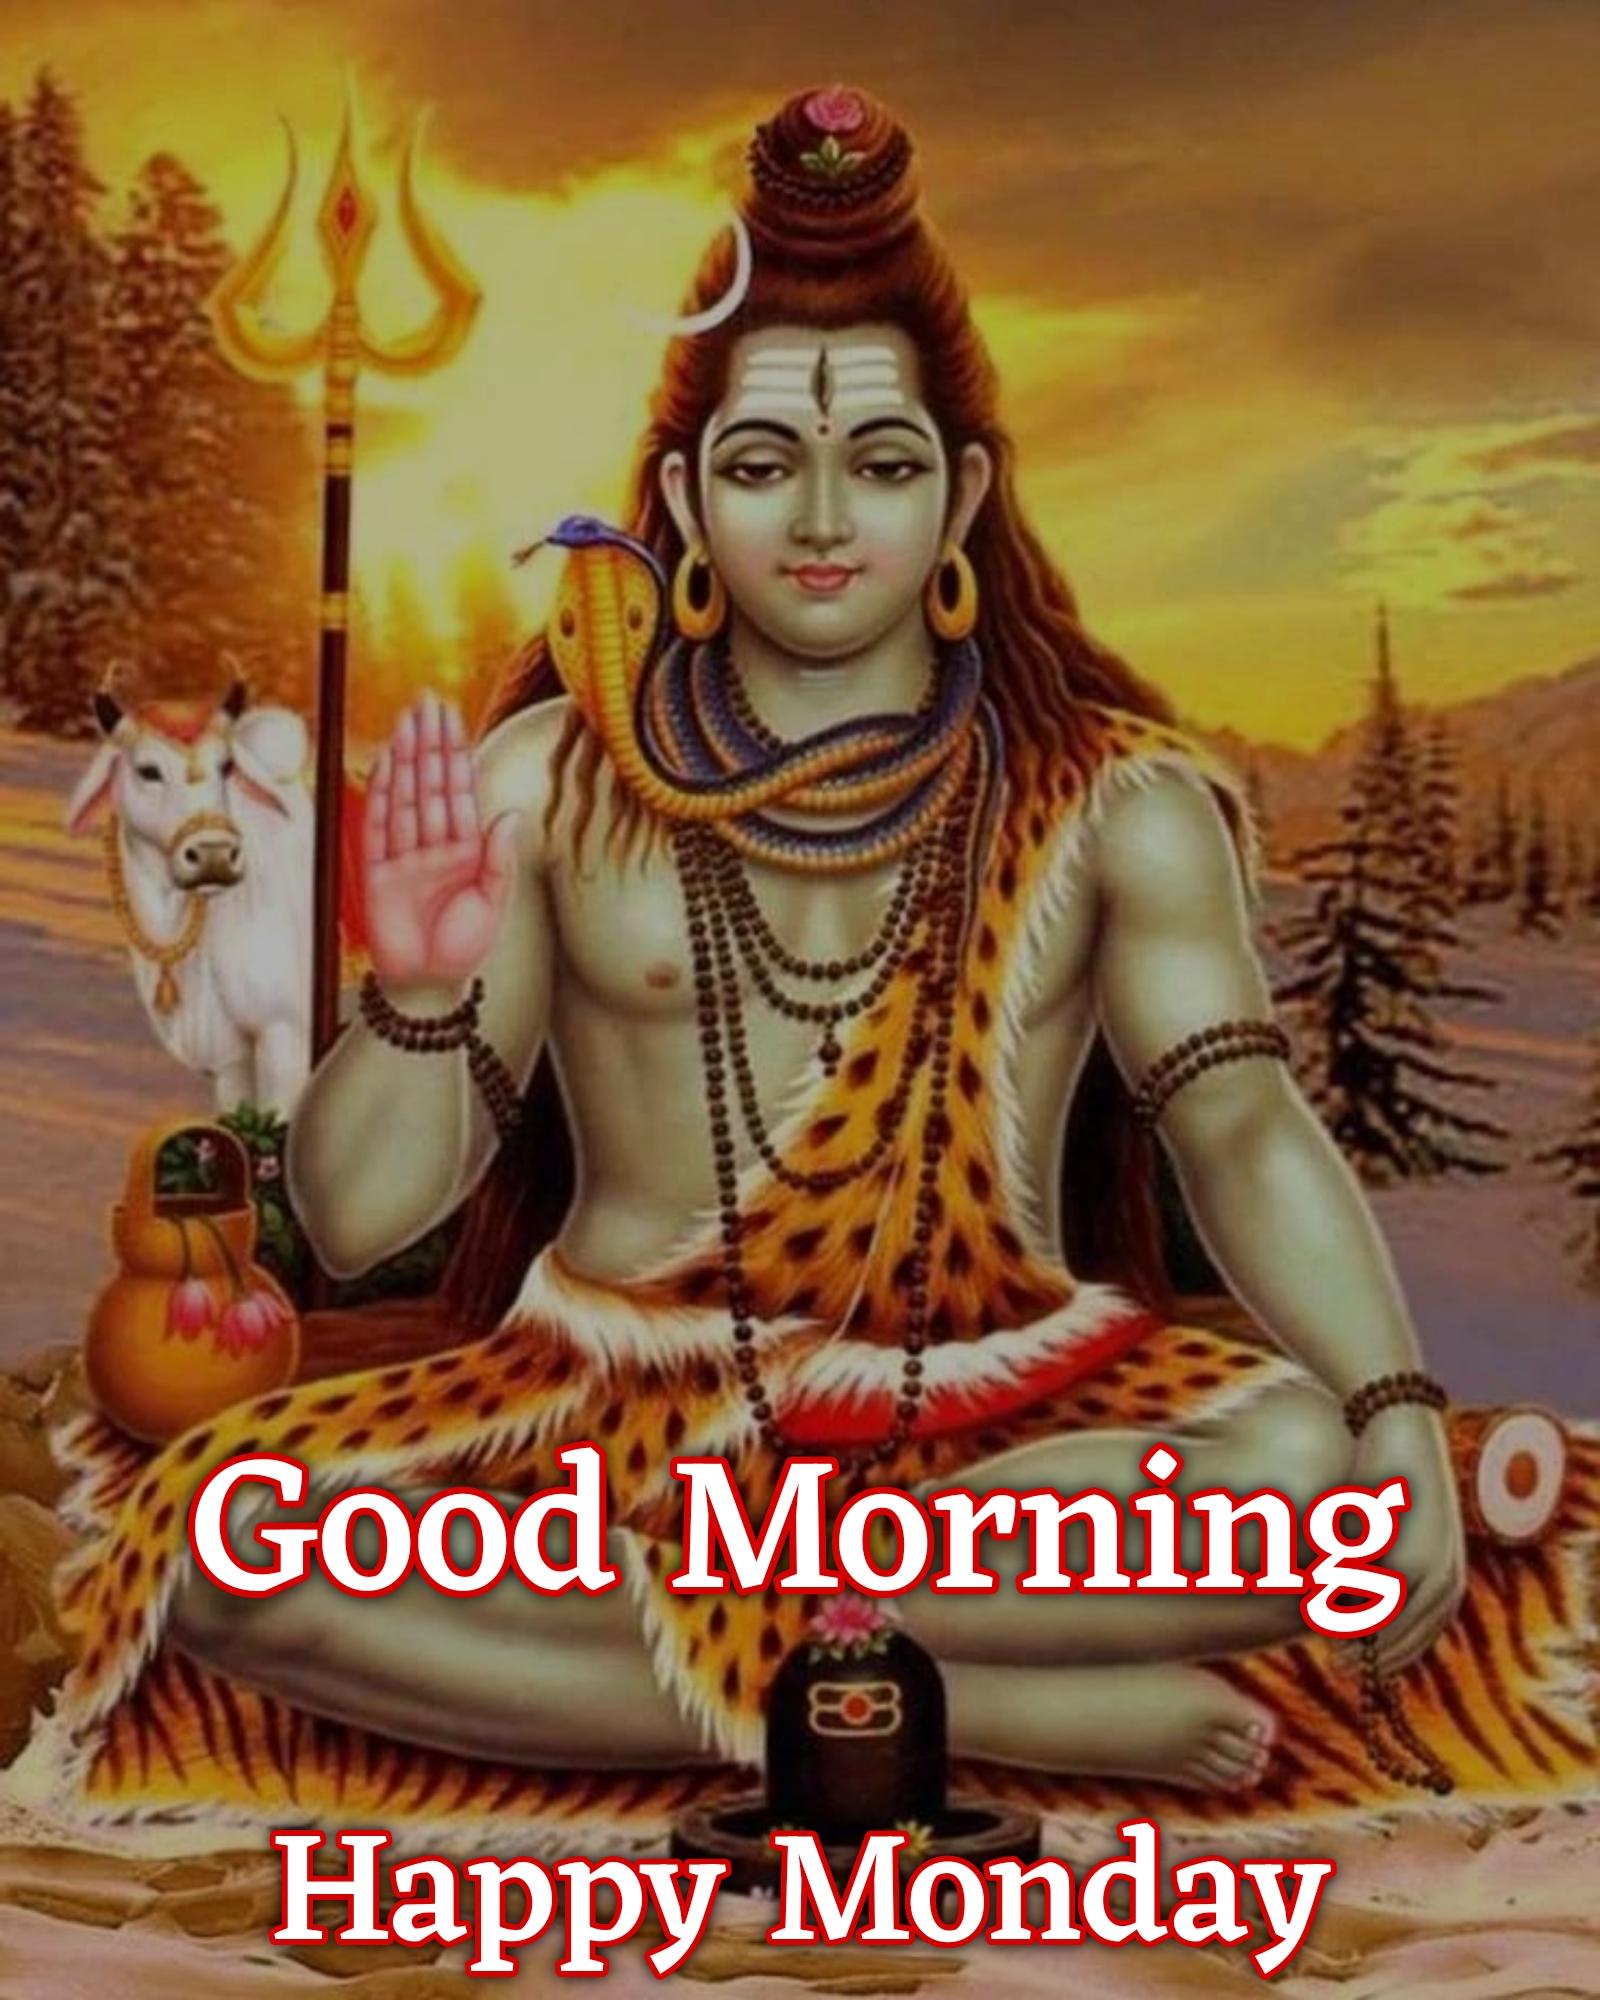 Good Morning With Lord Shiva Images